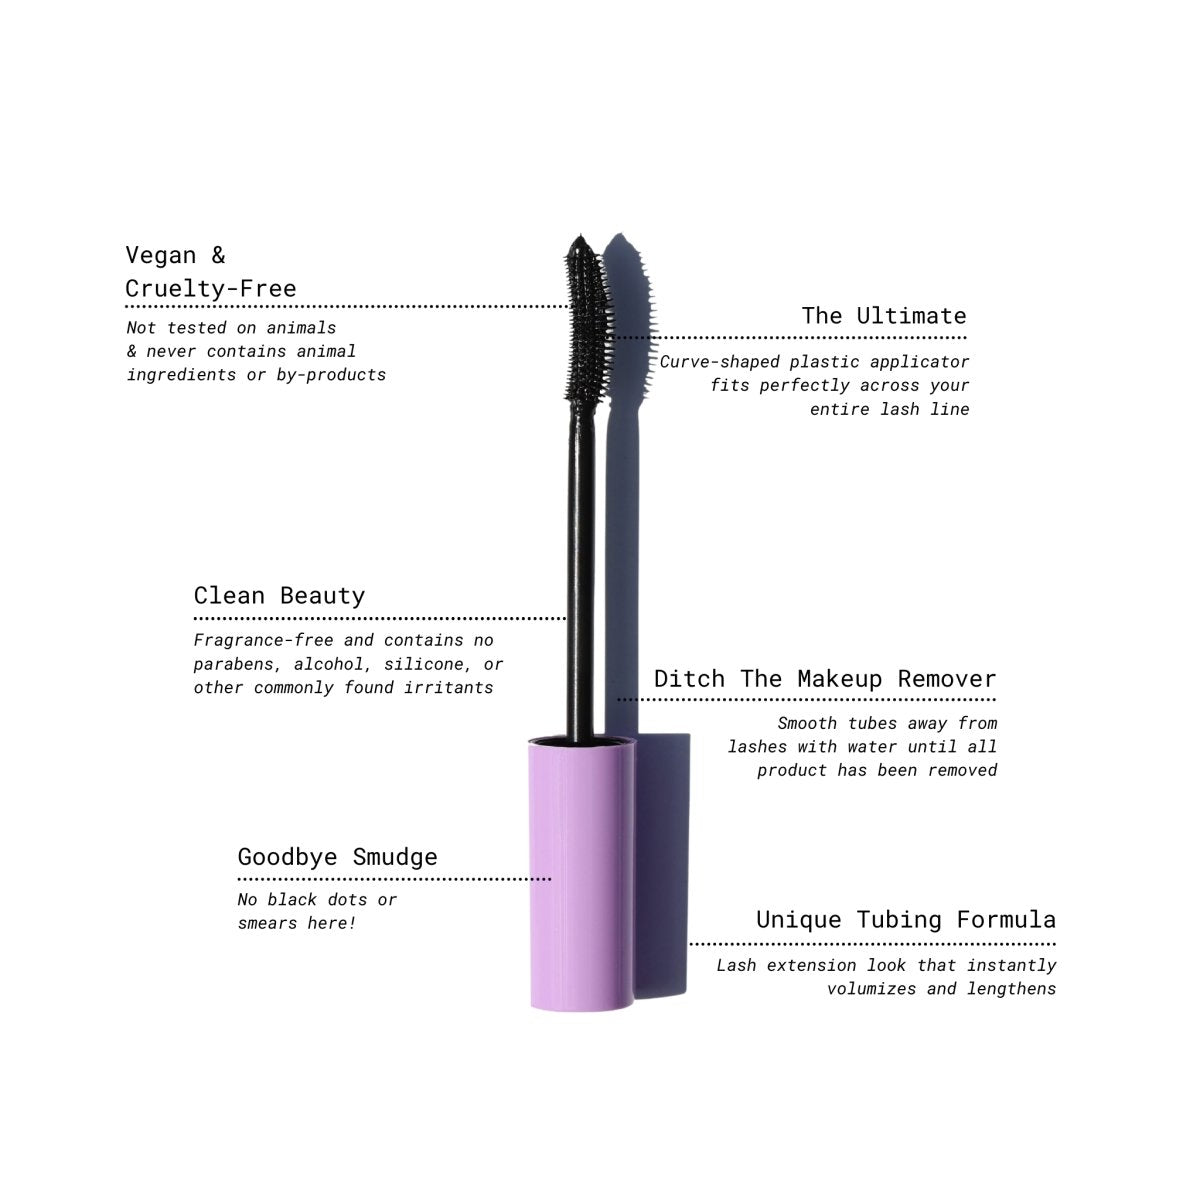 The Best Rated Tubing Mascara - Half Caked Totally Tubular The Ultimate